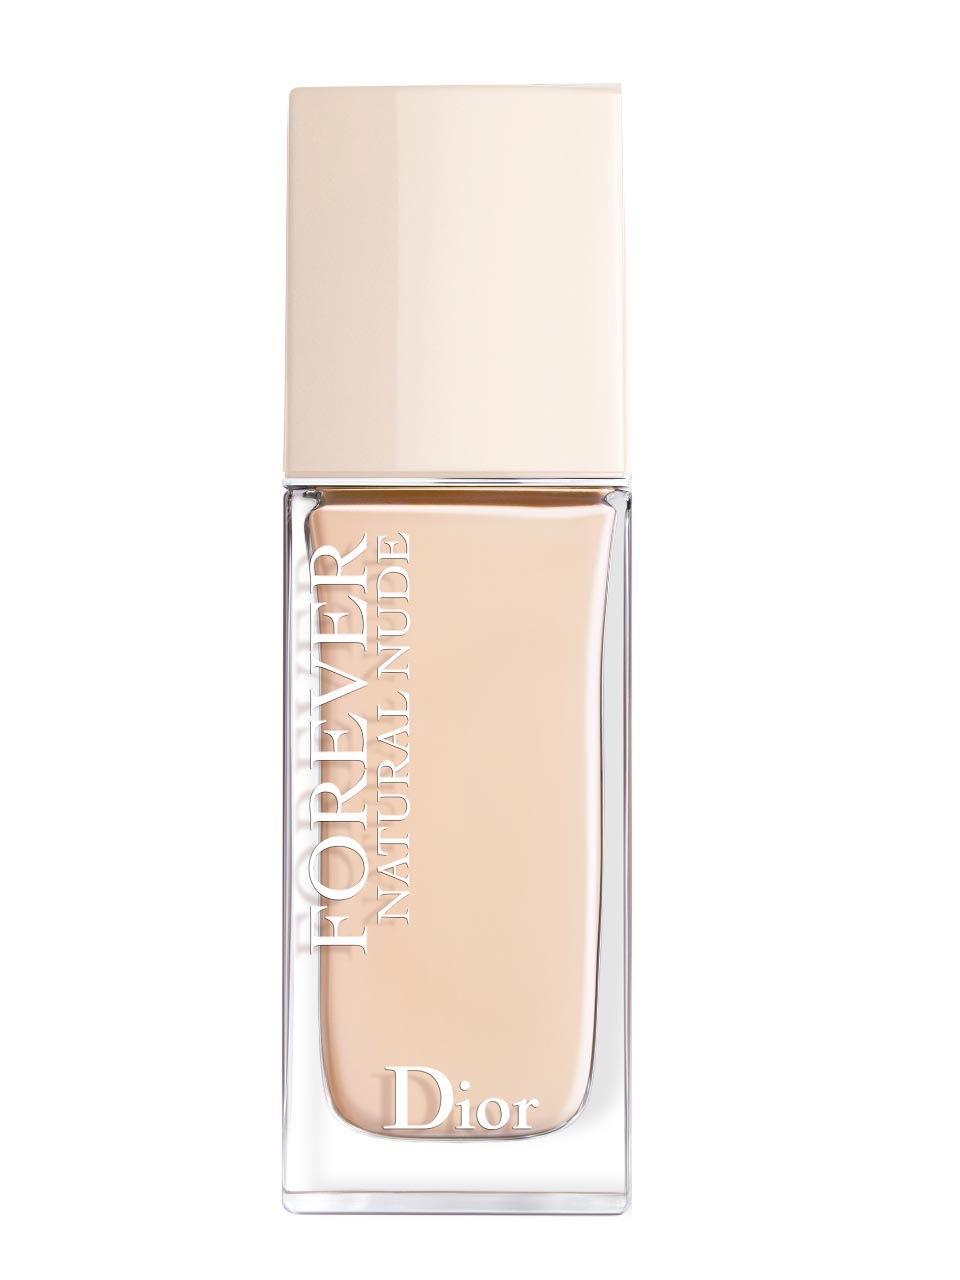 Dior Diorskin Forever Natural Nude Foundation Fluid N° 1N Neutral 30 ml null - onesize - 1